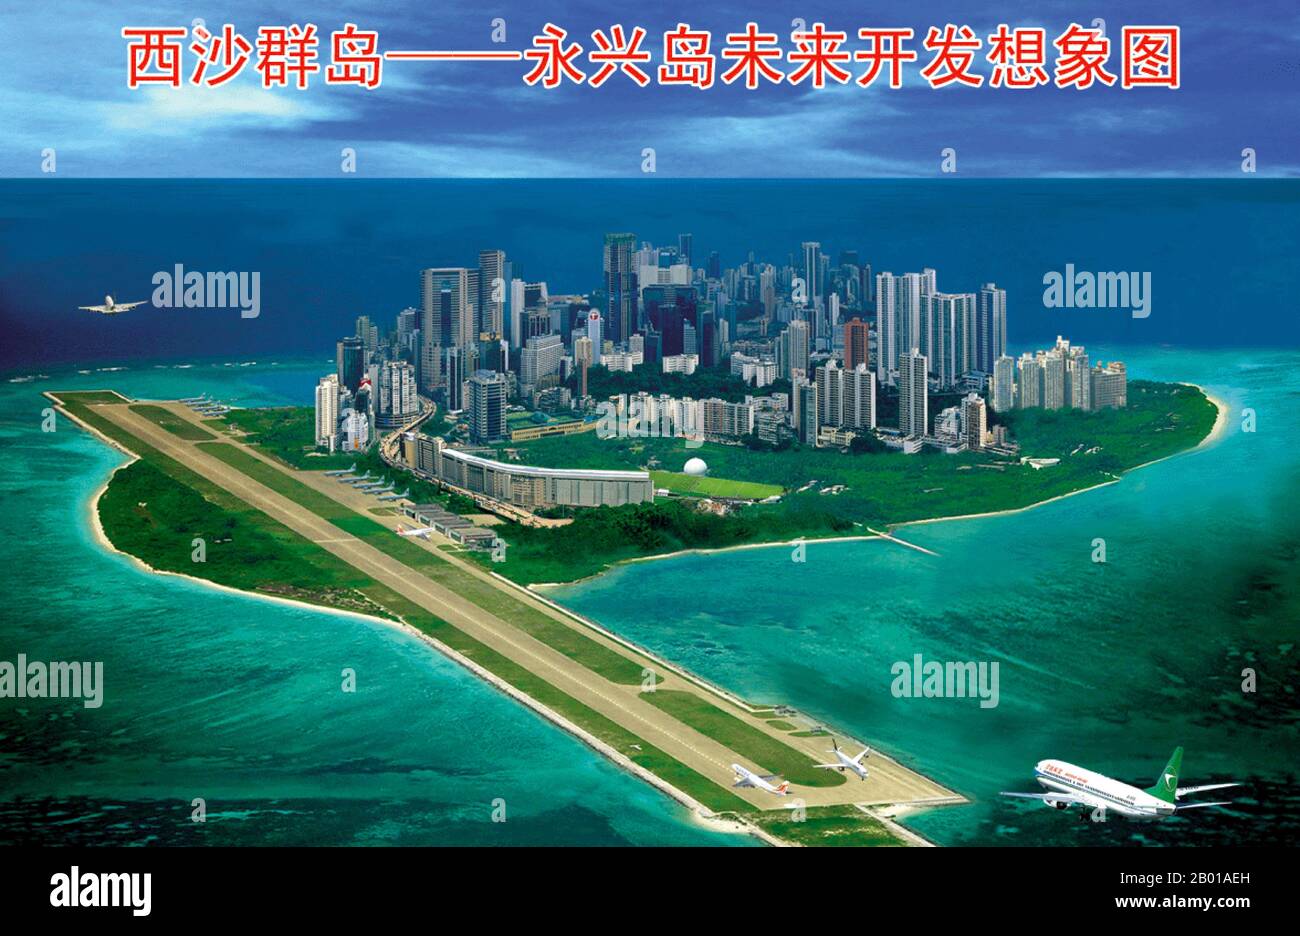 China: Proposed development image of Yongxing or Woody Island in the Xi Sha or Paracels Islands, called Đảo Phú Lâm by Vietnam.  The sovereignty of the Paracels has been the subject of dispute between the People's Republic of China, Republic of China (Taiwan), and Vietnam since at least the early 20th century.  France annexed the islands as part of French Indochina despite protests from China in the 1930s, but they were taken over by Japanese troops during the Second Sino-Japanese War. Japan renounced the claims to the islands after the war and the ROC occupied some of the Paracels in 1946. Stock Photo